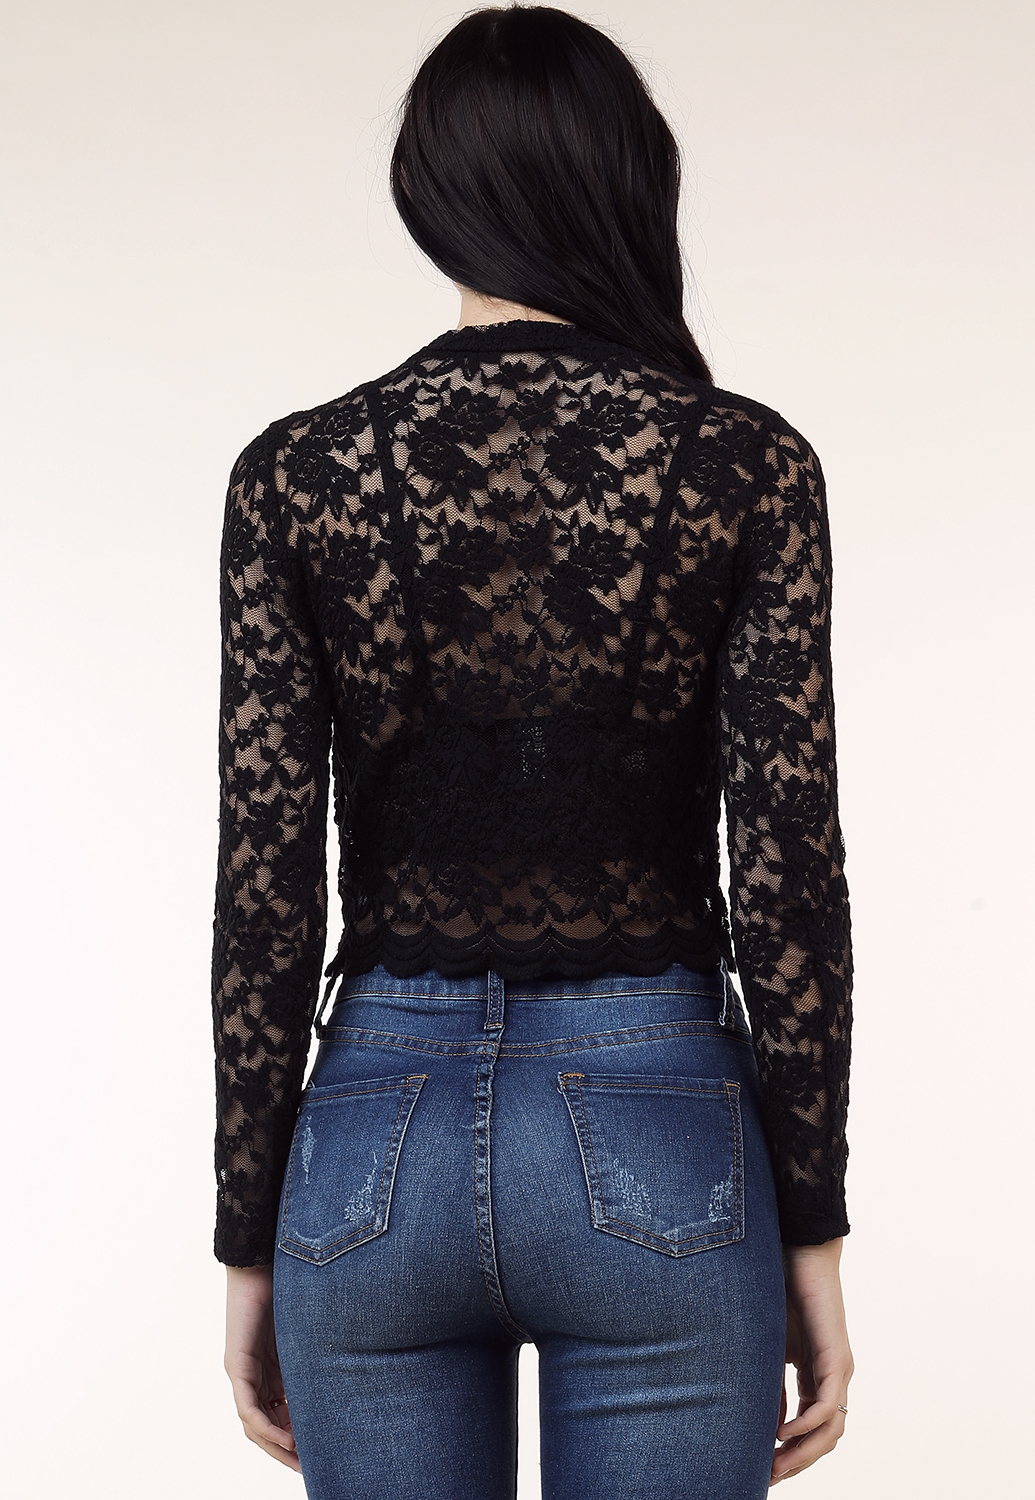 Sheer Floral Lace Top